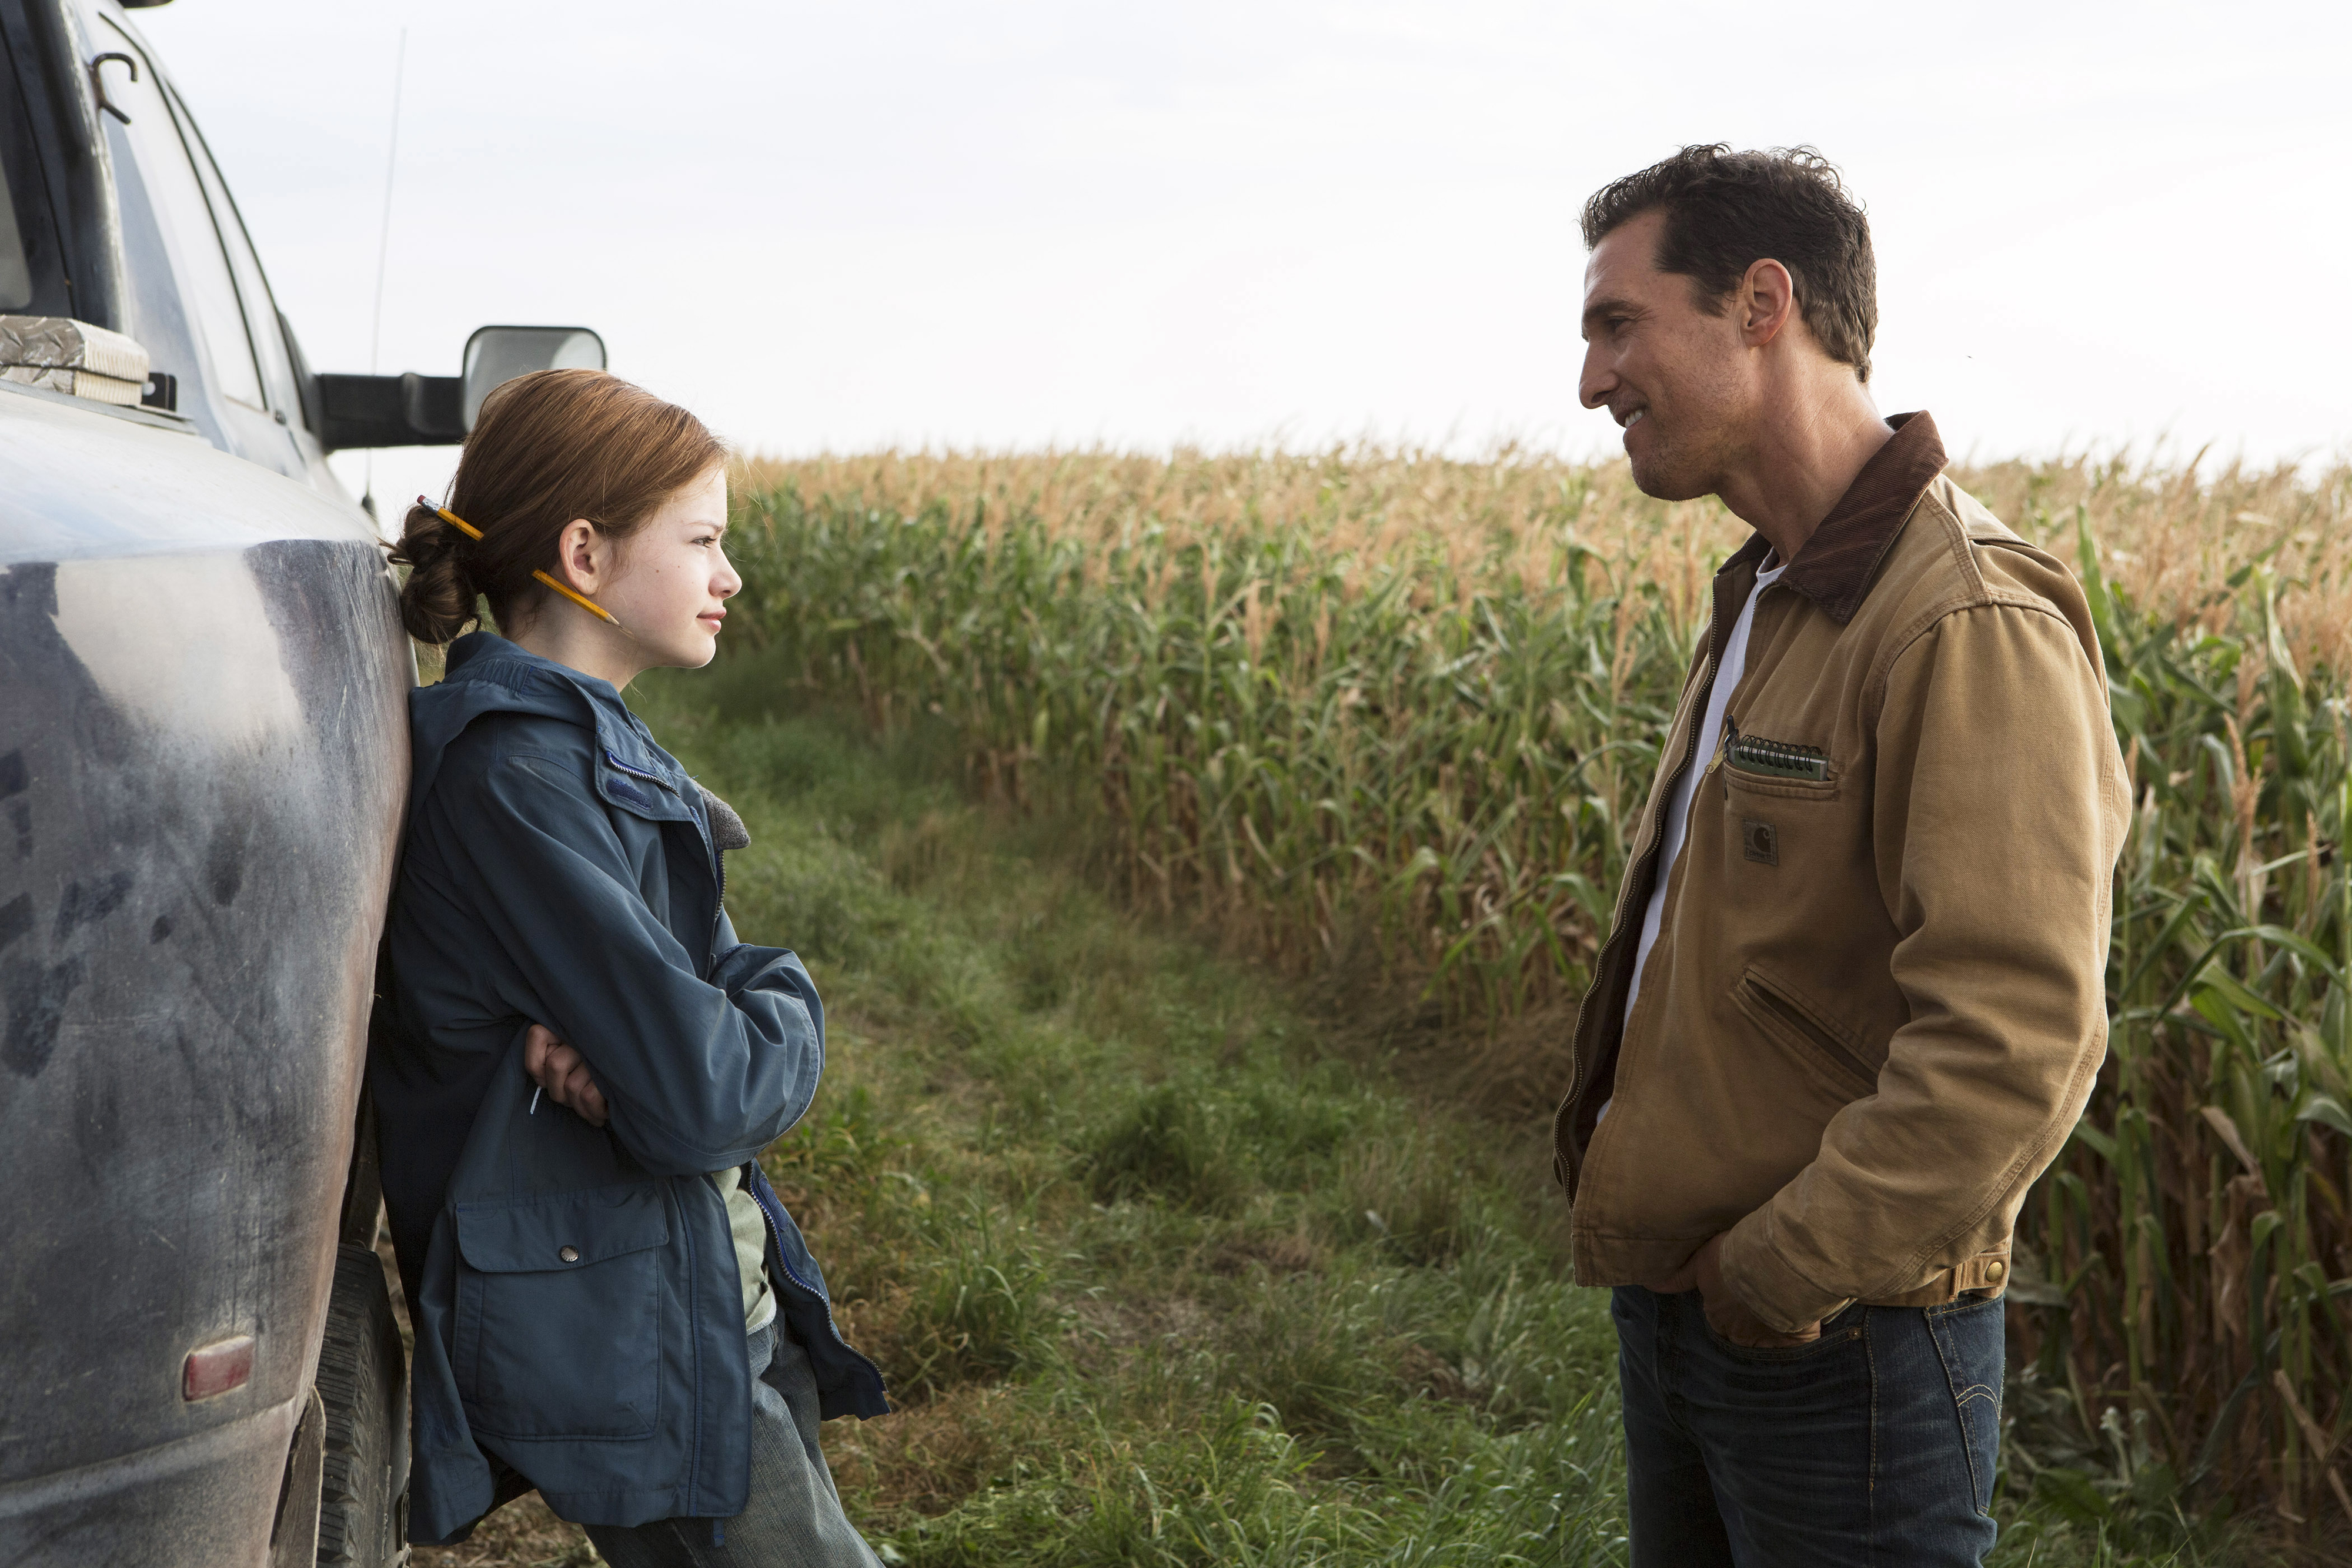 A man and a young girl stand talking next to a truck in a cornfield